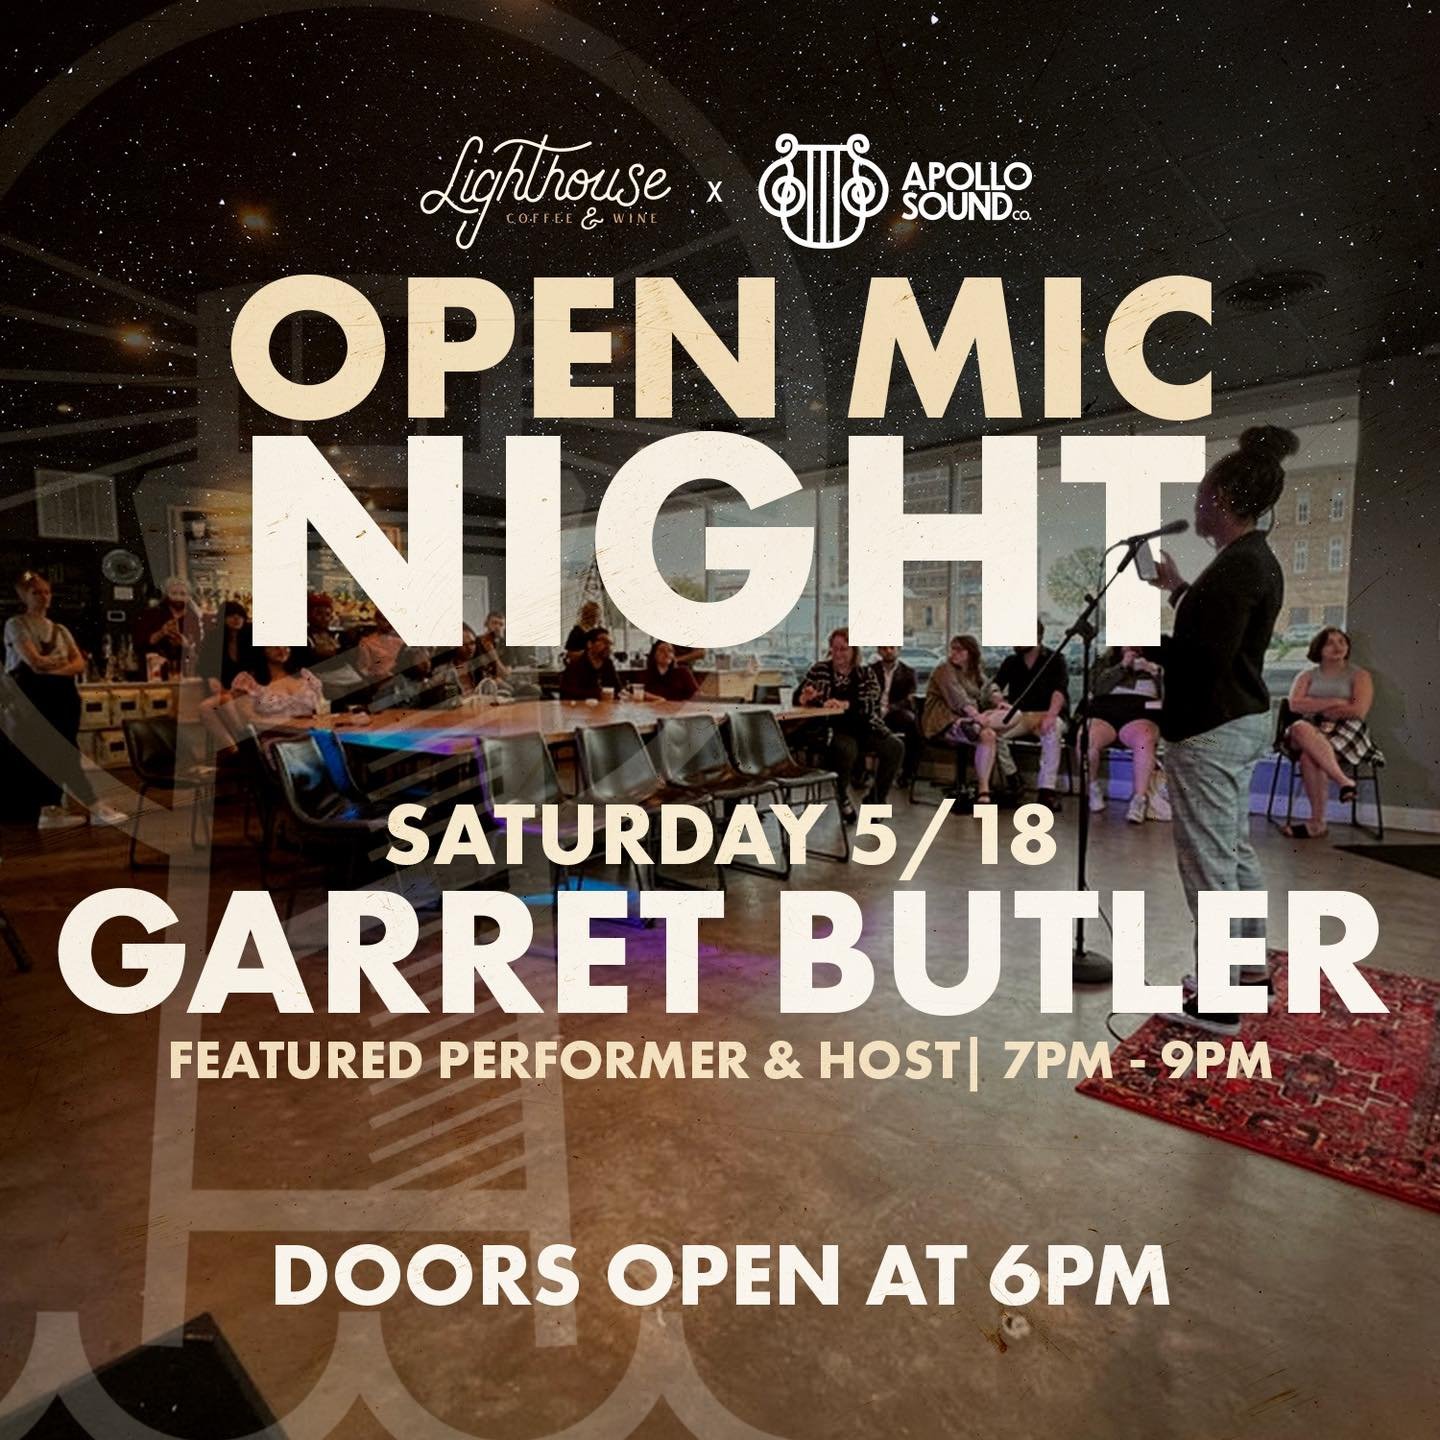 Come show off or just enjoy some community with our Open Mic Night this Saturday night! With @garretbutlermusic_ as our host and performer, it&rsquo;s going to be a rocking night 😎 
Thank you to @apsoundco for putting on this event!